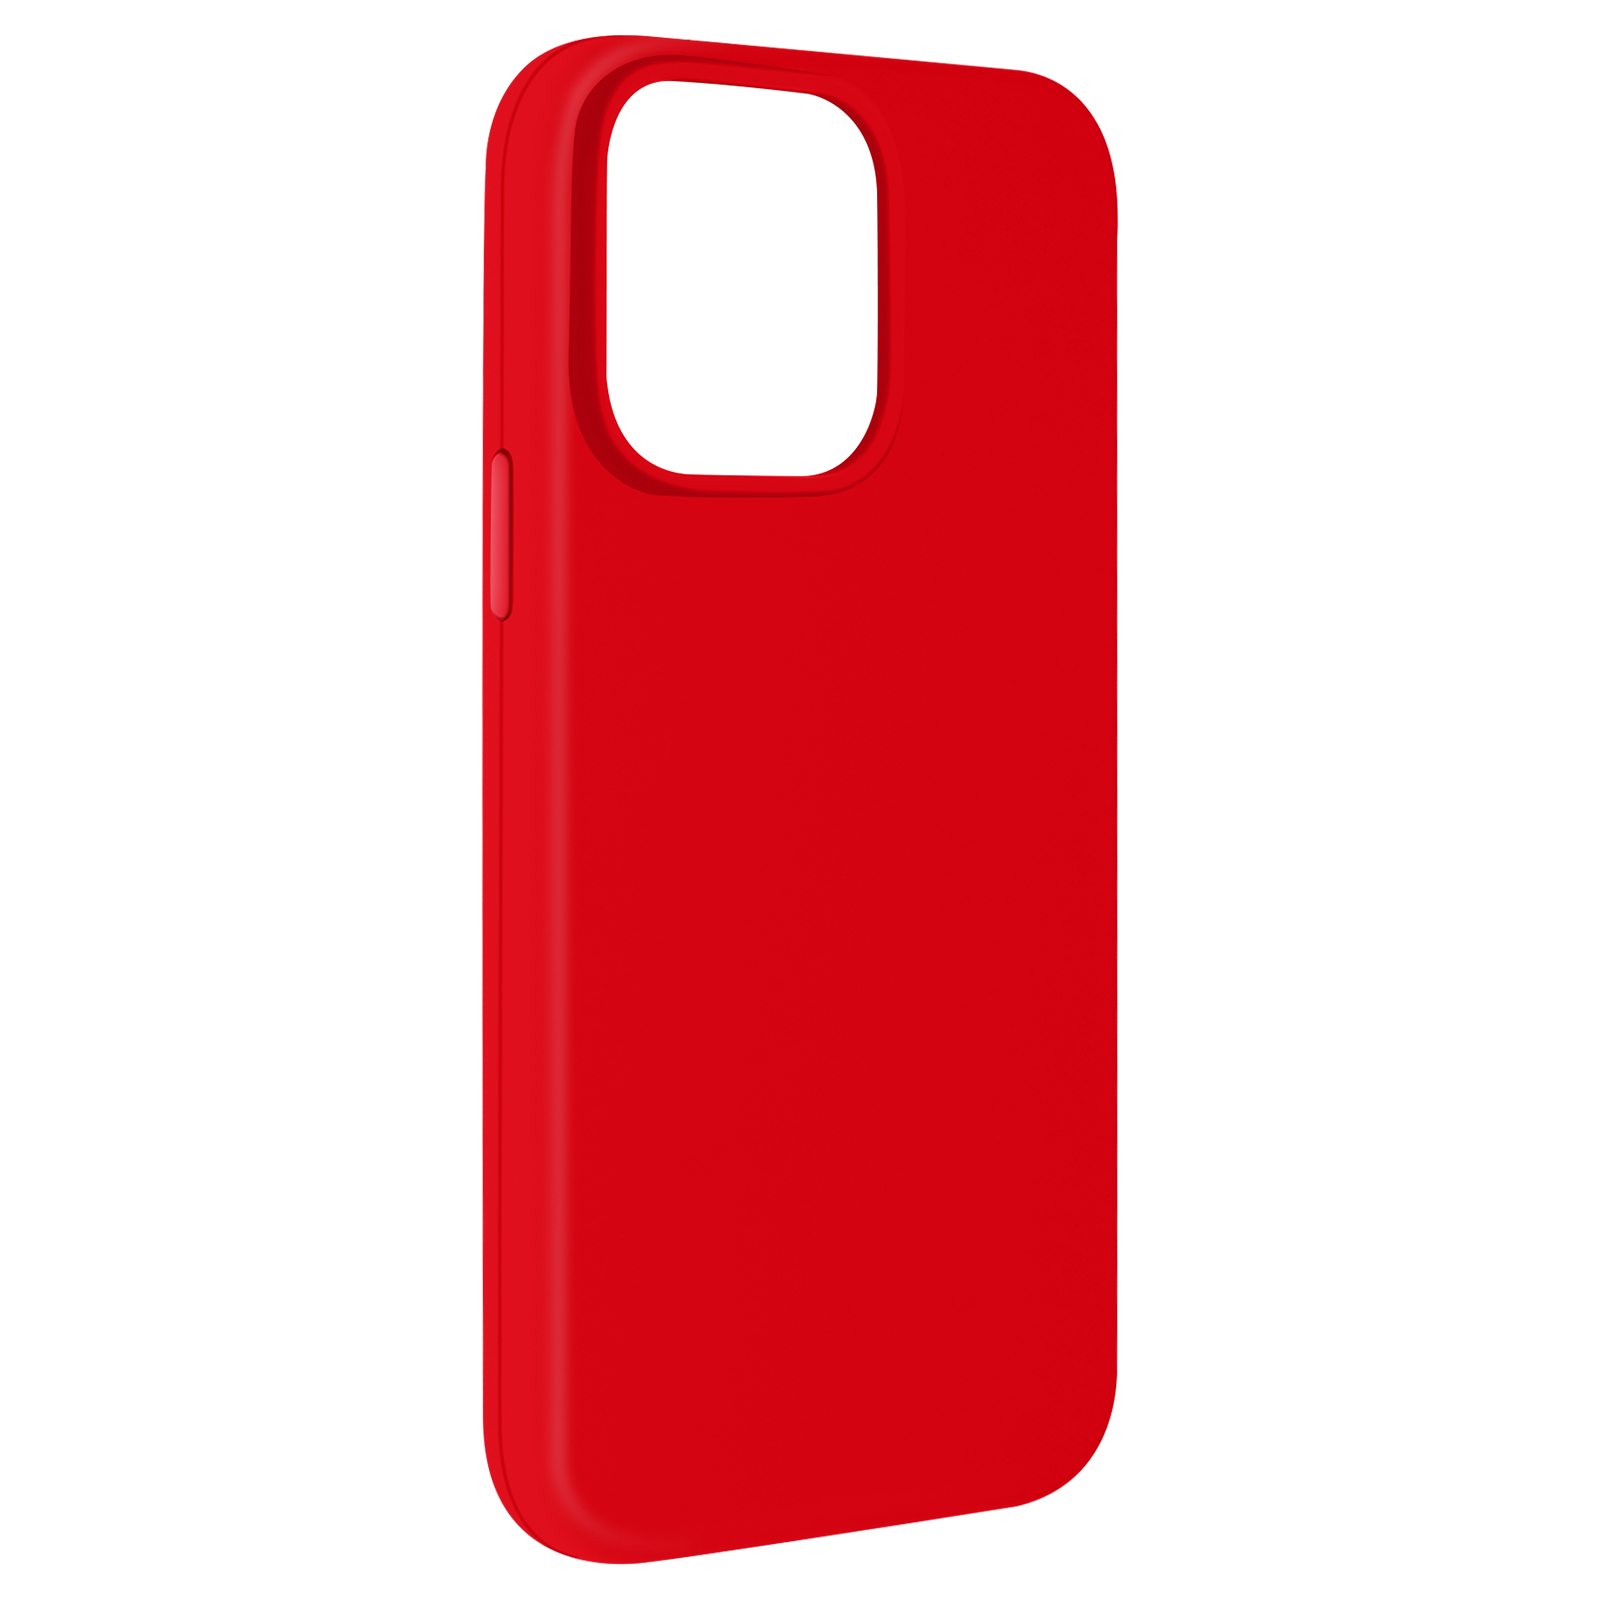 AVIZAR Soft Touch Series, Rot 15 Max, Backcover, Apple, Pro iPhone